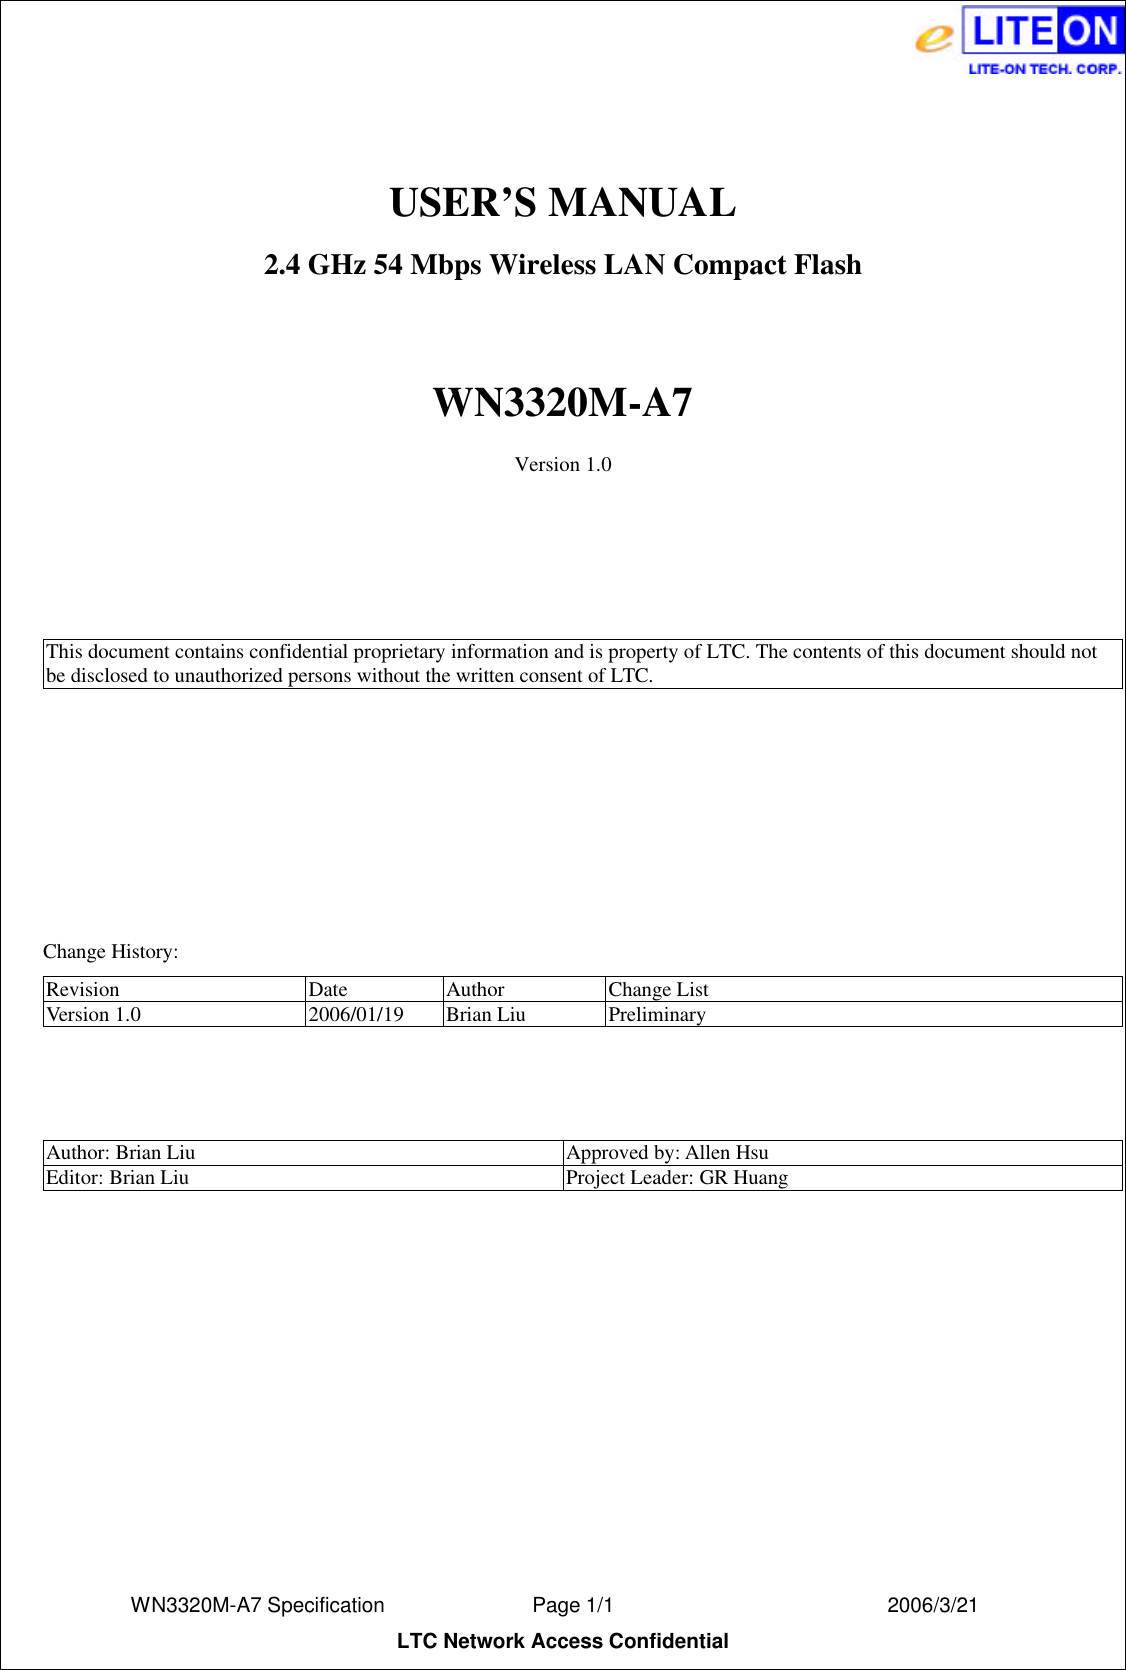  WN3320M-A7 Specification               Page 1/1                          2006/3/21 LTC Network Access Confidential  USER’S MANUAL 2.4 GHz 54 Mbps Wireless LAN Compact Flash  WN3320M-A7 Version 1.0     This document contains confidential proprietary information and is property of LTC. The contents of this document should not be disclosed to unauthorized persons without the written consent of LTC.          Change History: Revision Date Author Change List Version 1.0 2006/01/19 Brian Liu Preliminary    Author: Brian Liu Approved by: Allen Hsu Editor: Brian Liu Project Leader: GR Huang  